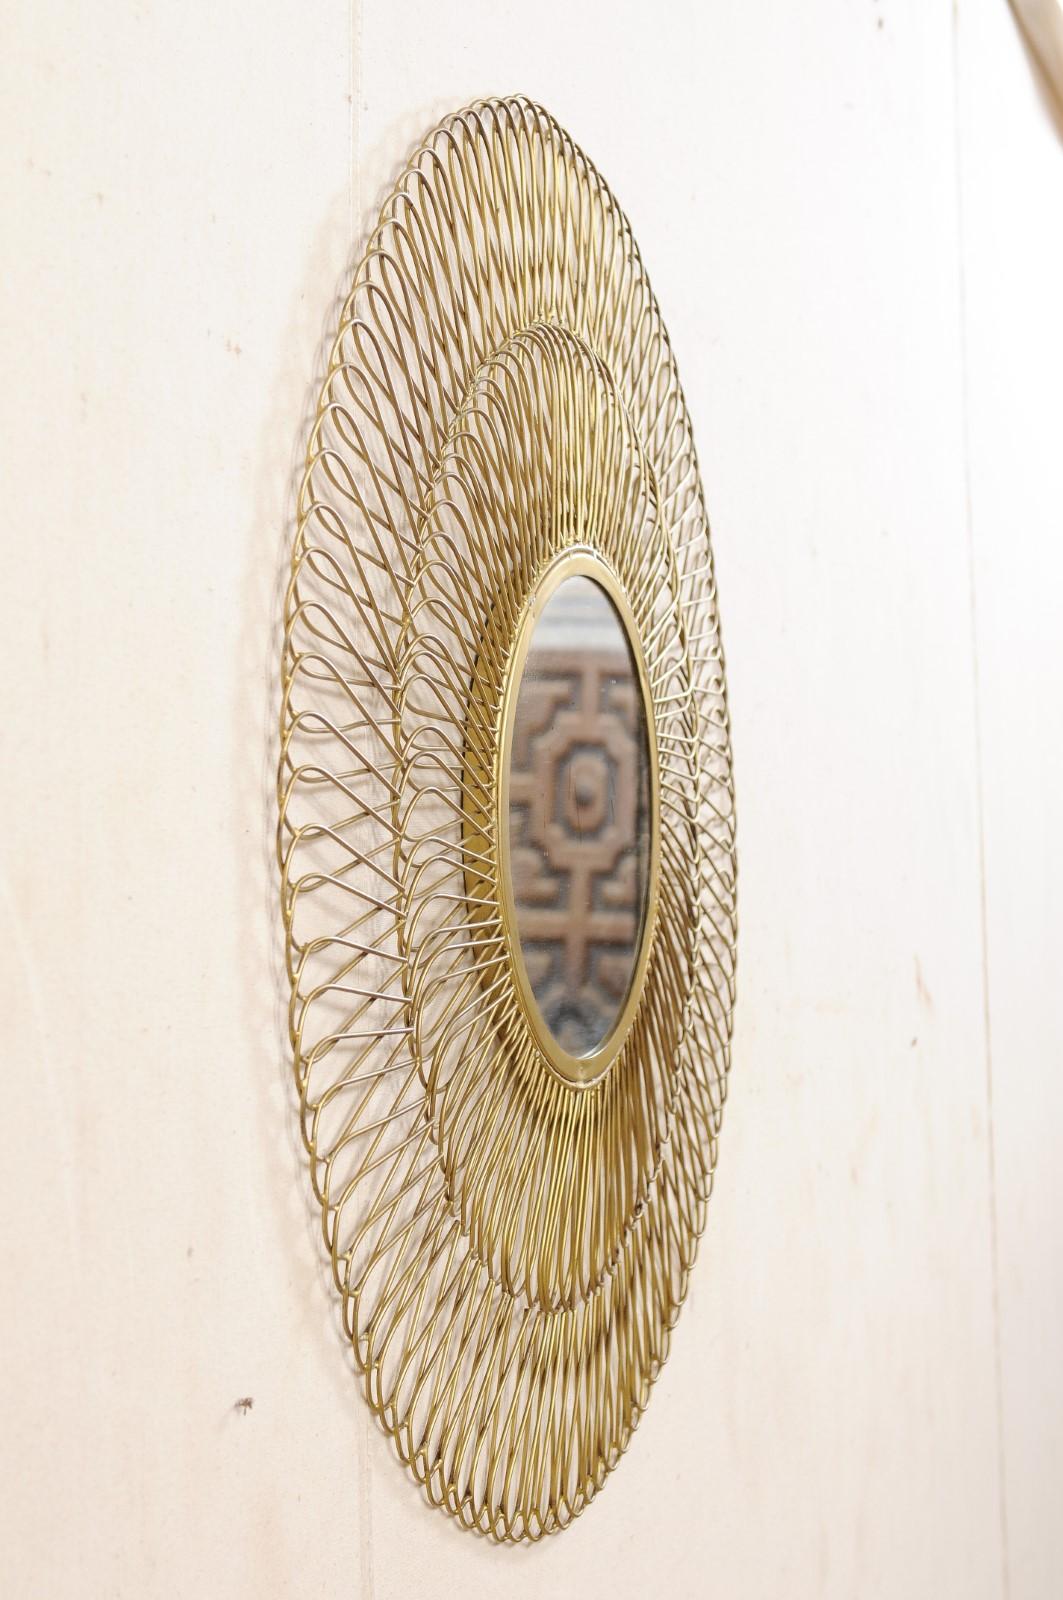 Spanish Round-Shaped Brass Mirror with Open Intertwining Loop Surround For Sale 5